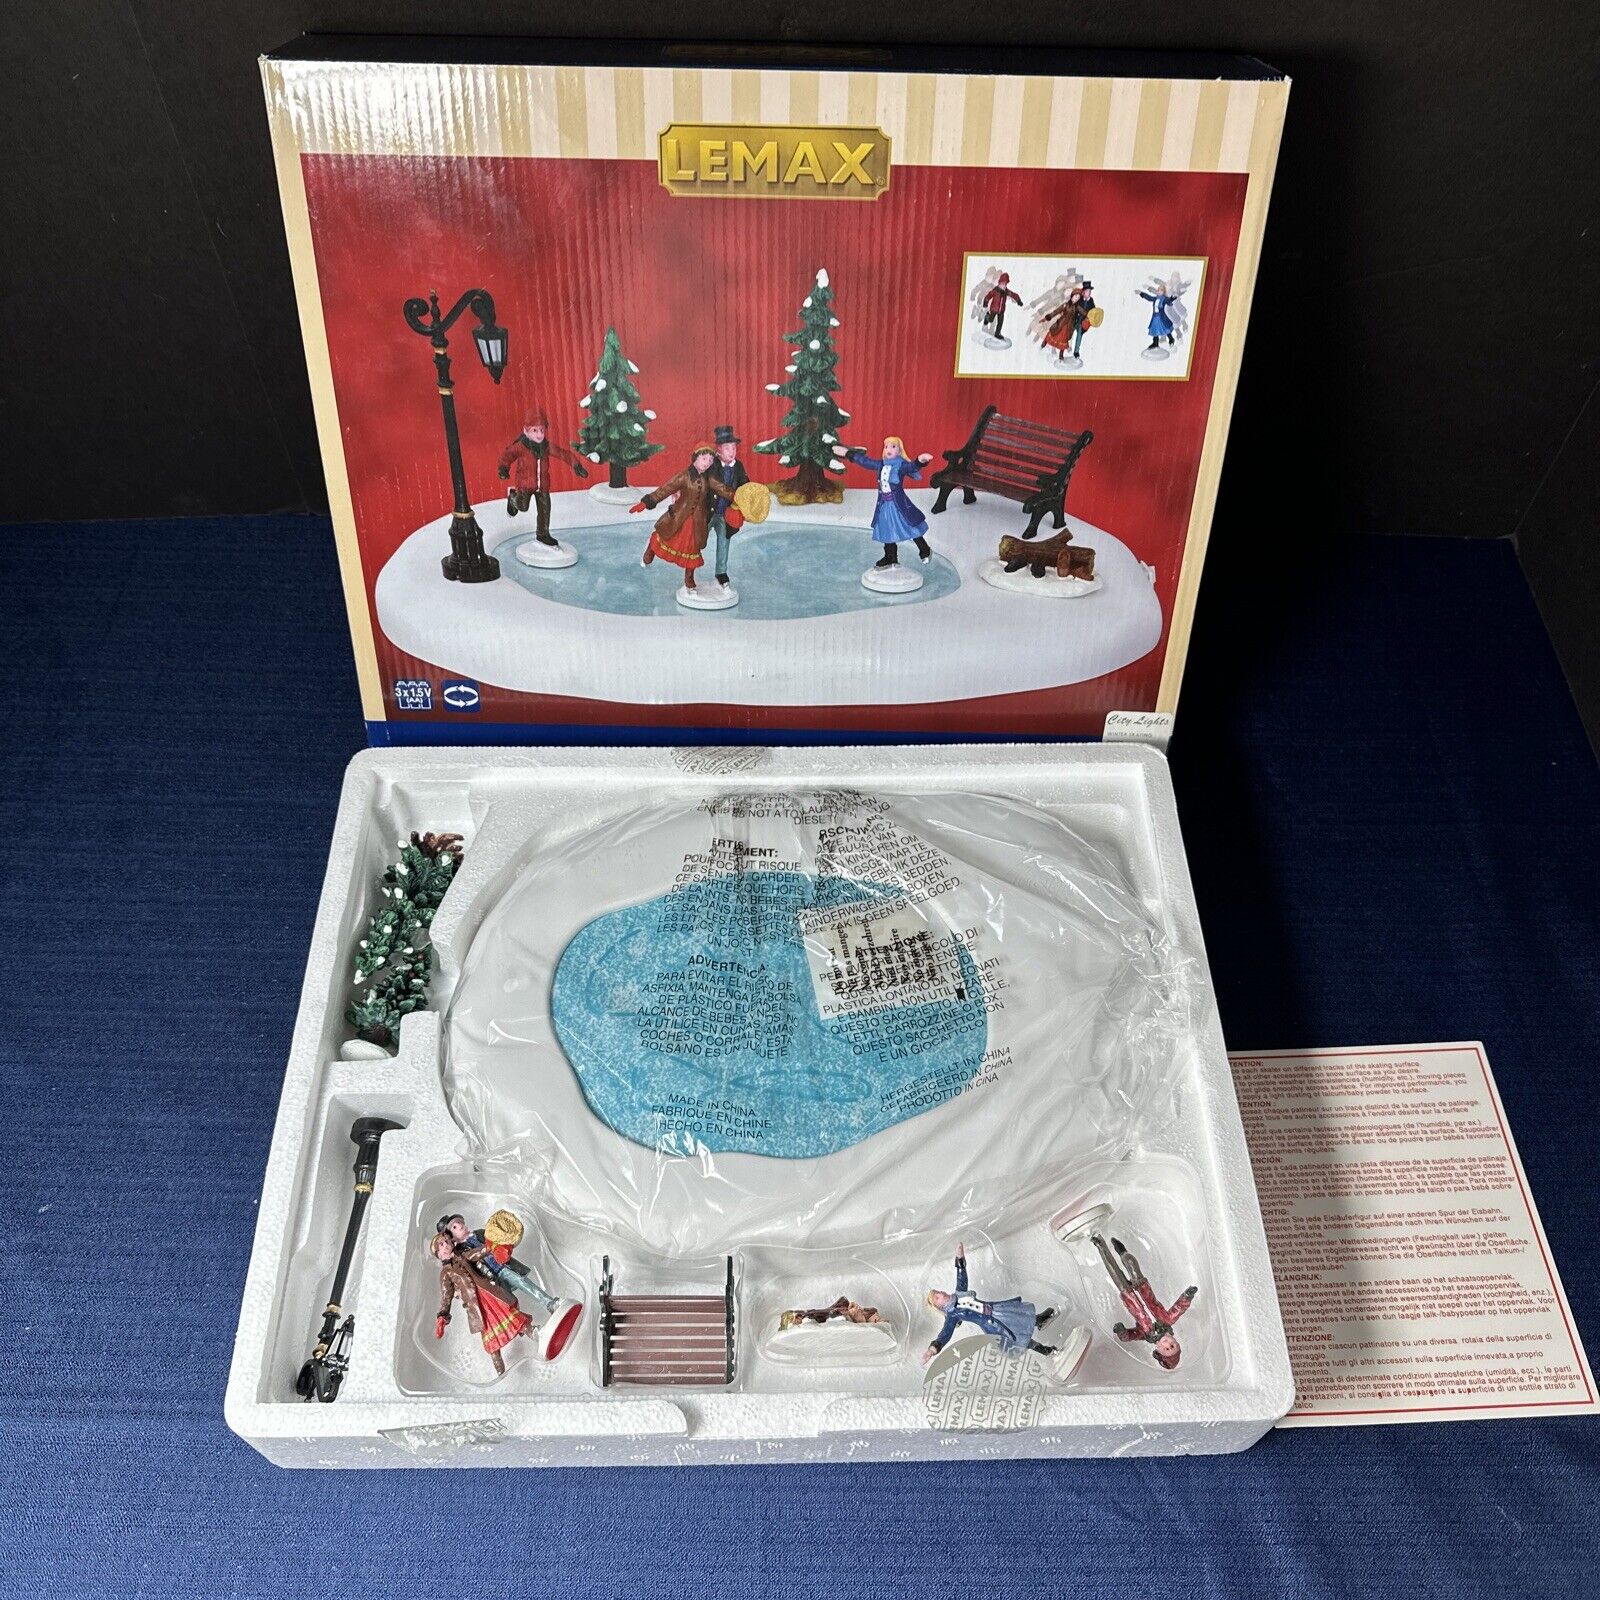 Lemax Winter Skating Scene Battery Powered Open Box Item Mint Condition